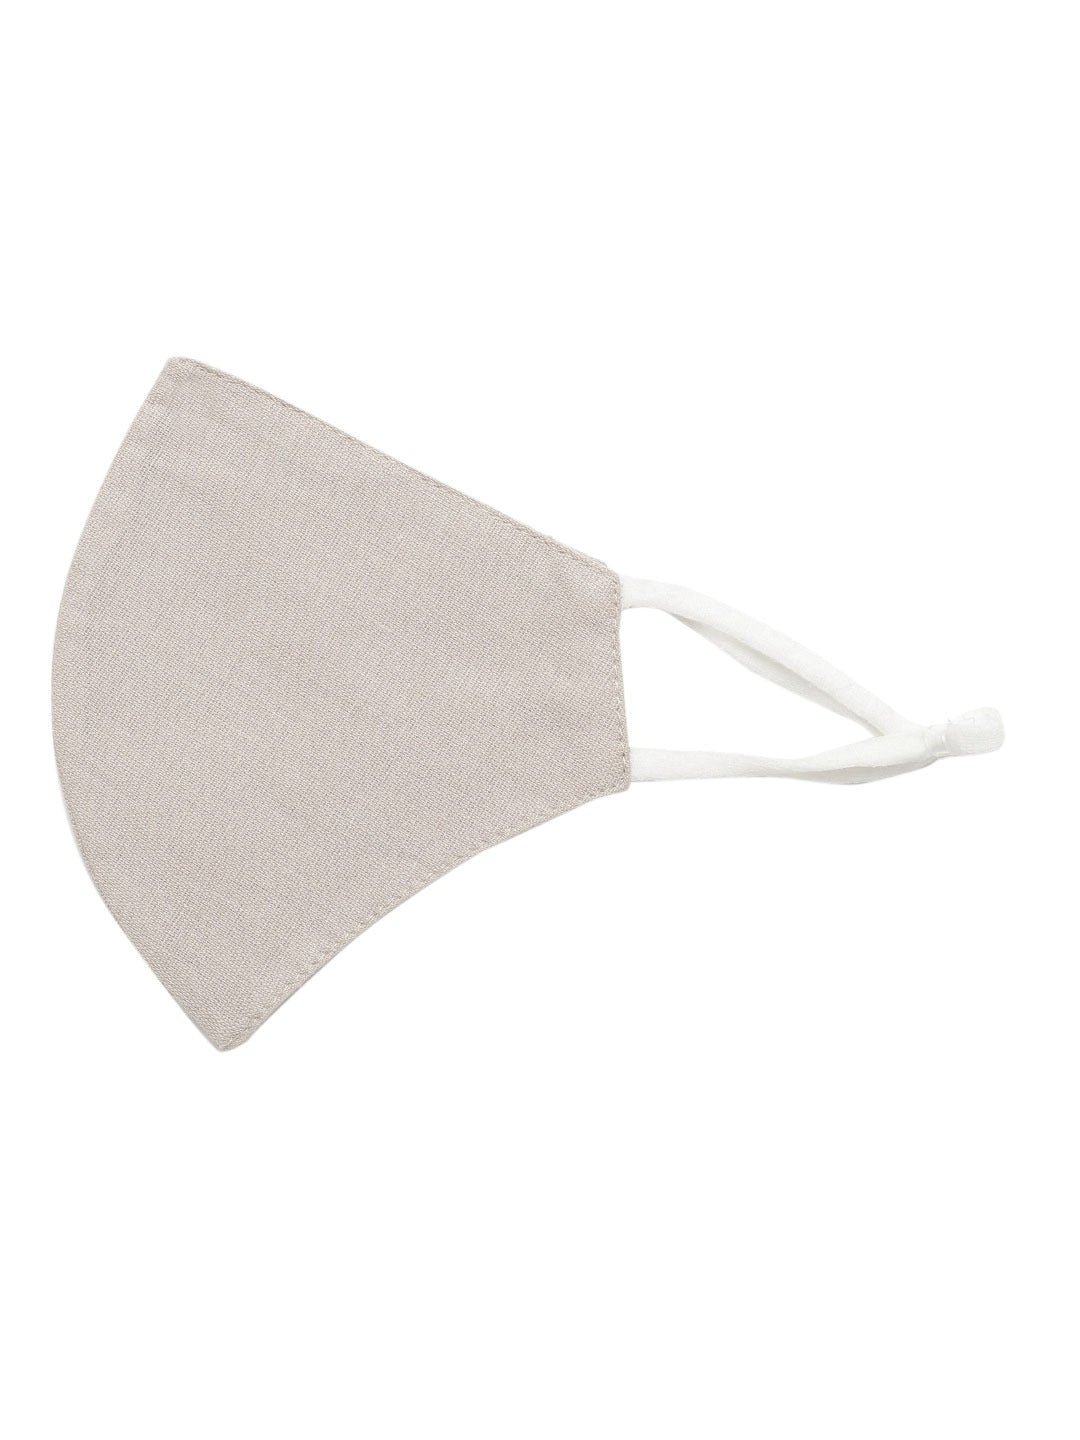 Blueberry Grey solid 2 ply cotton reusable chain mask